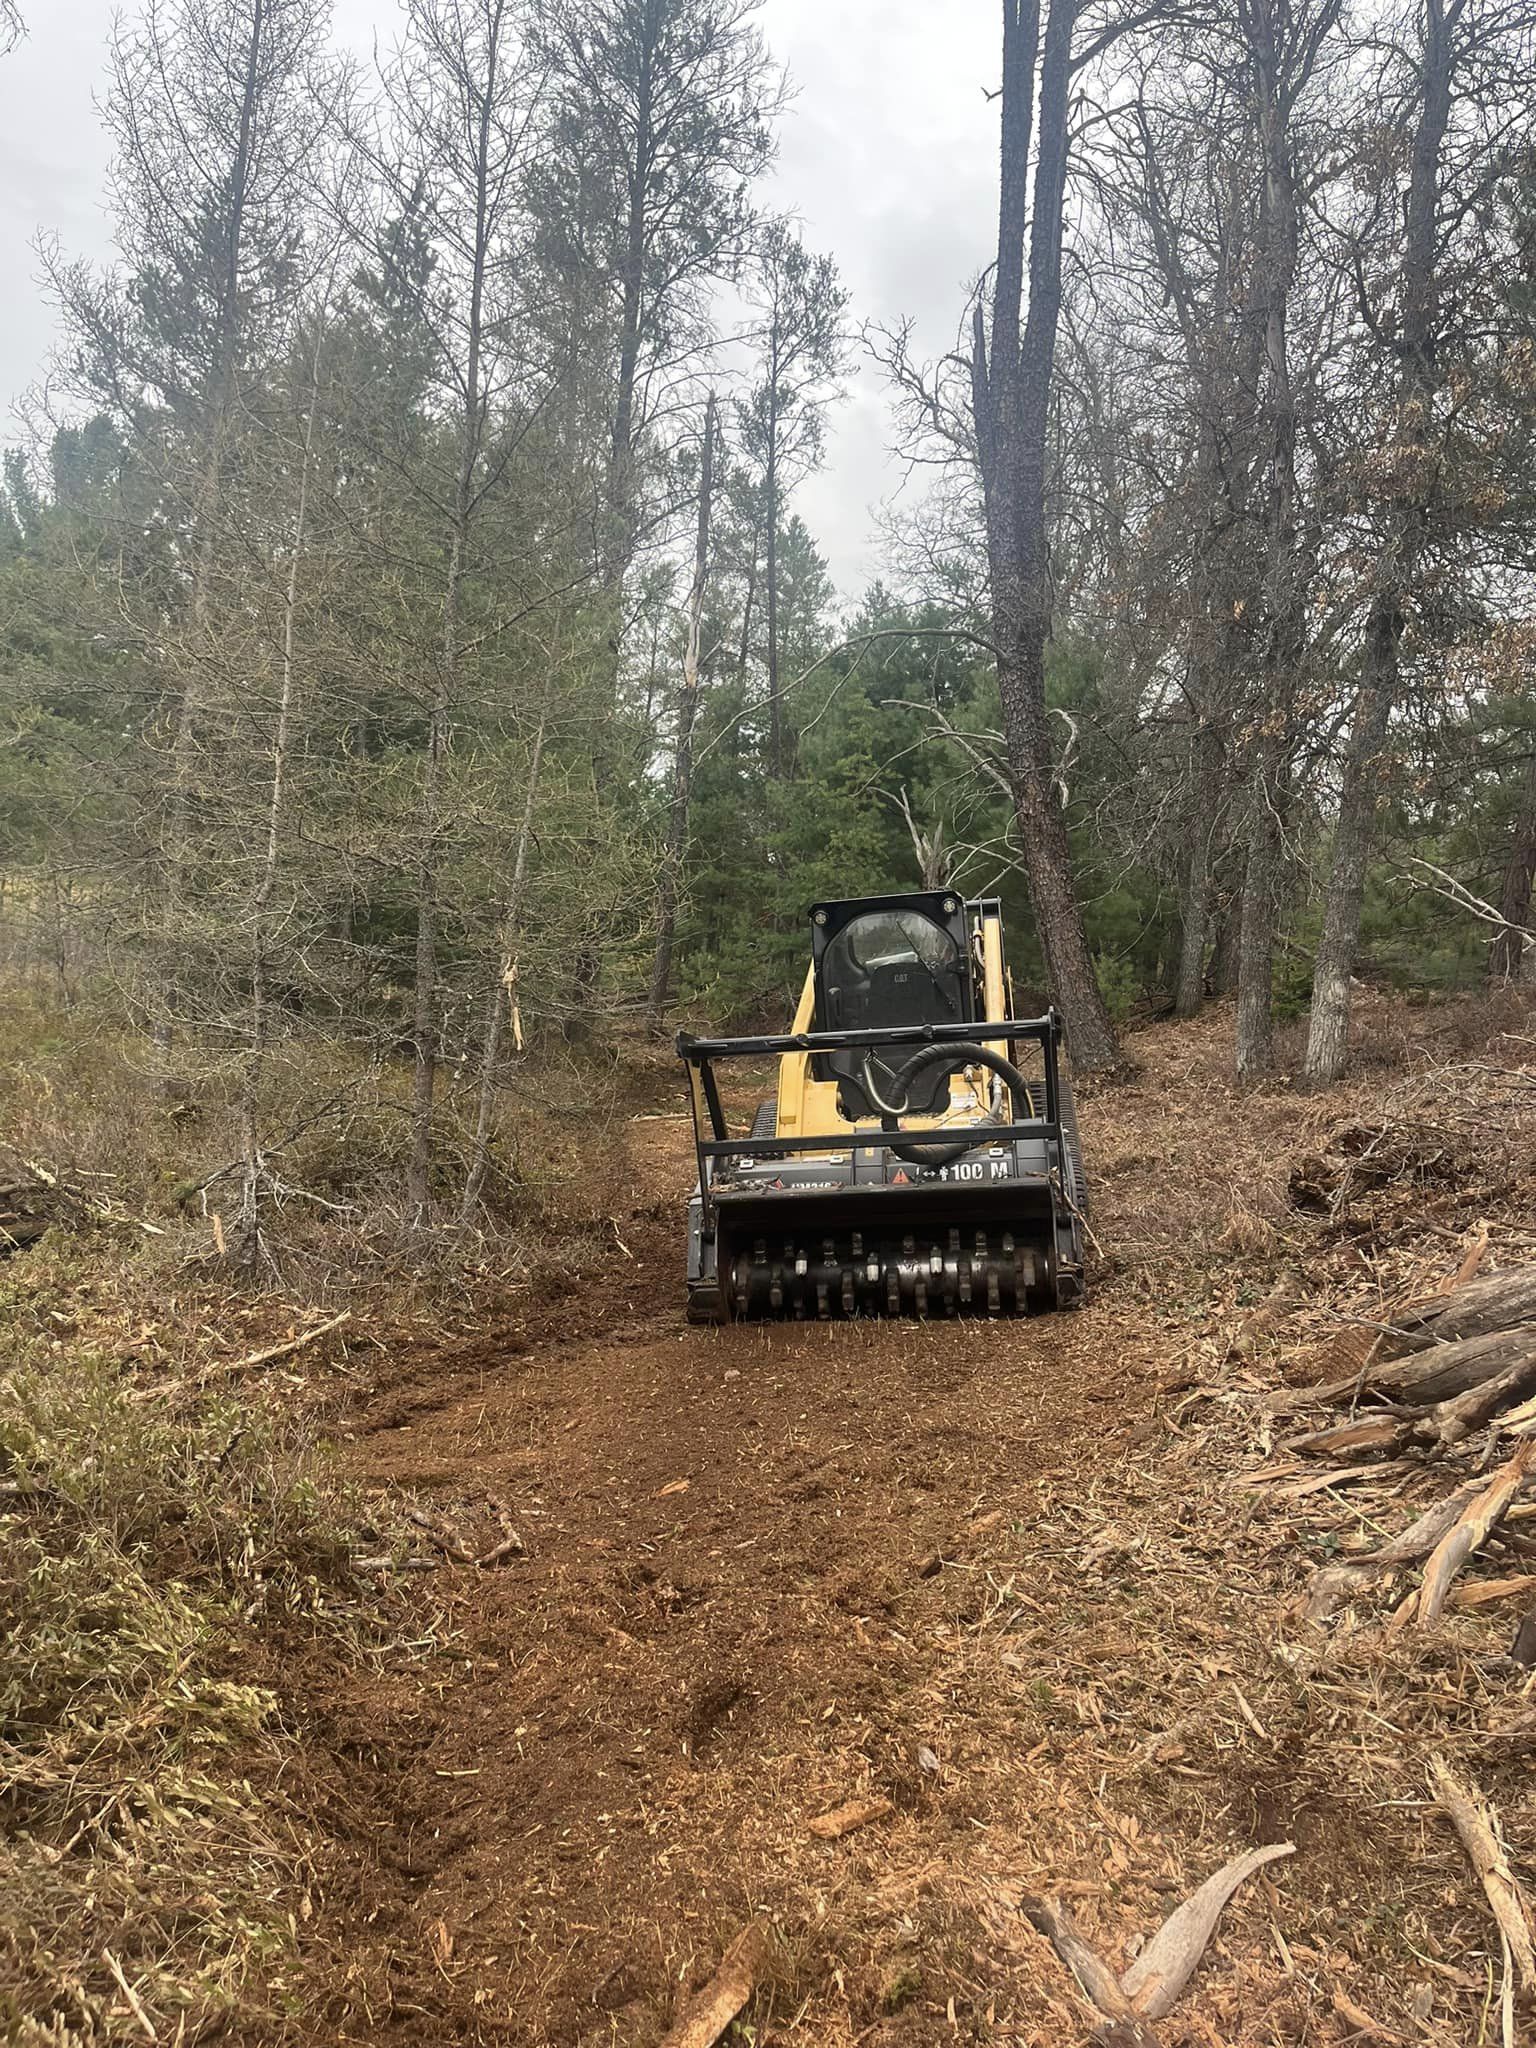 profesional forestry mulching & land clearing Midland MI being done